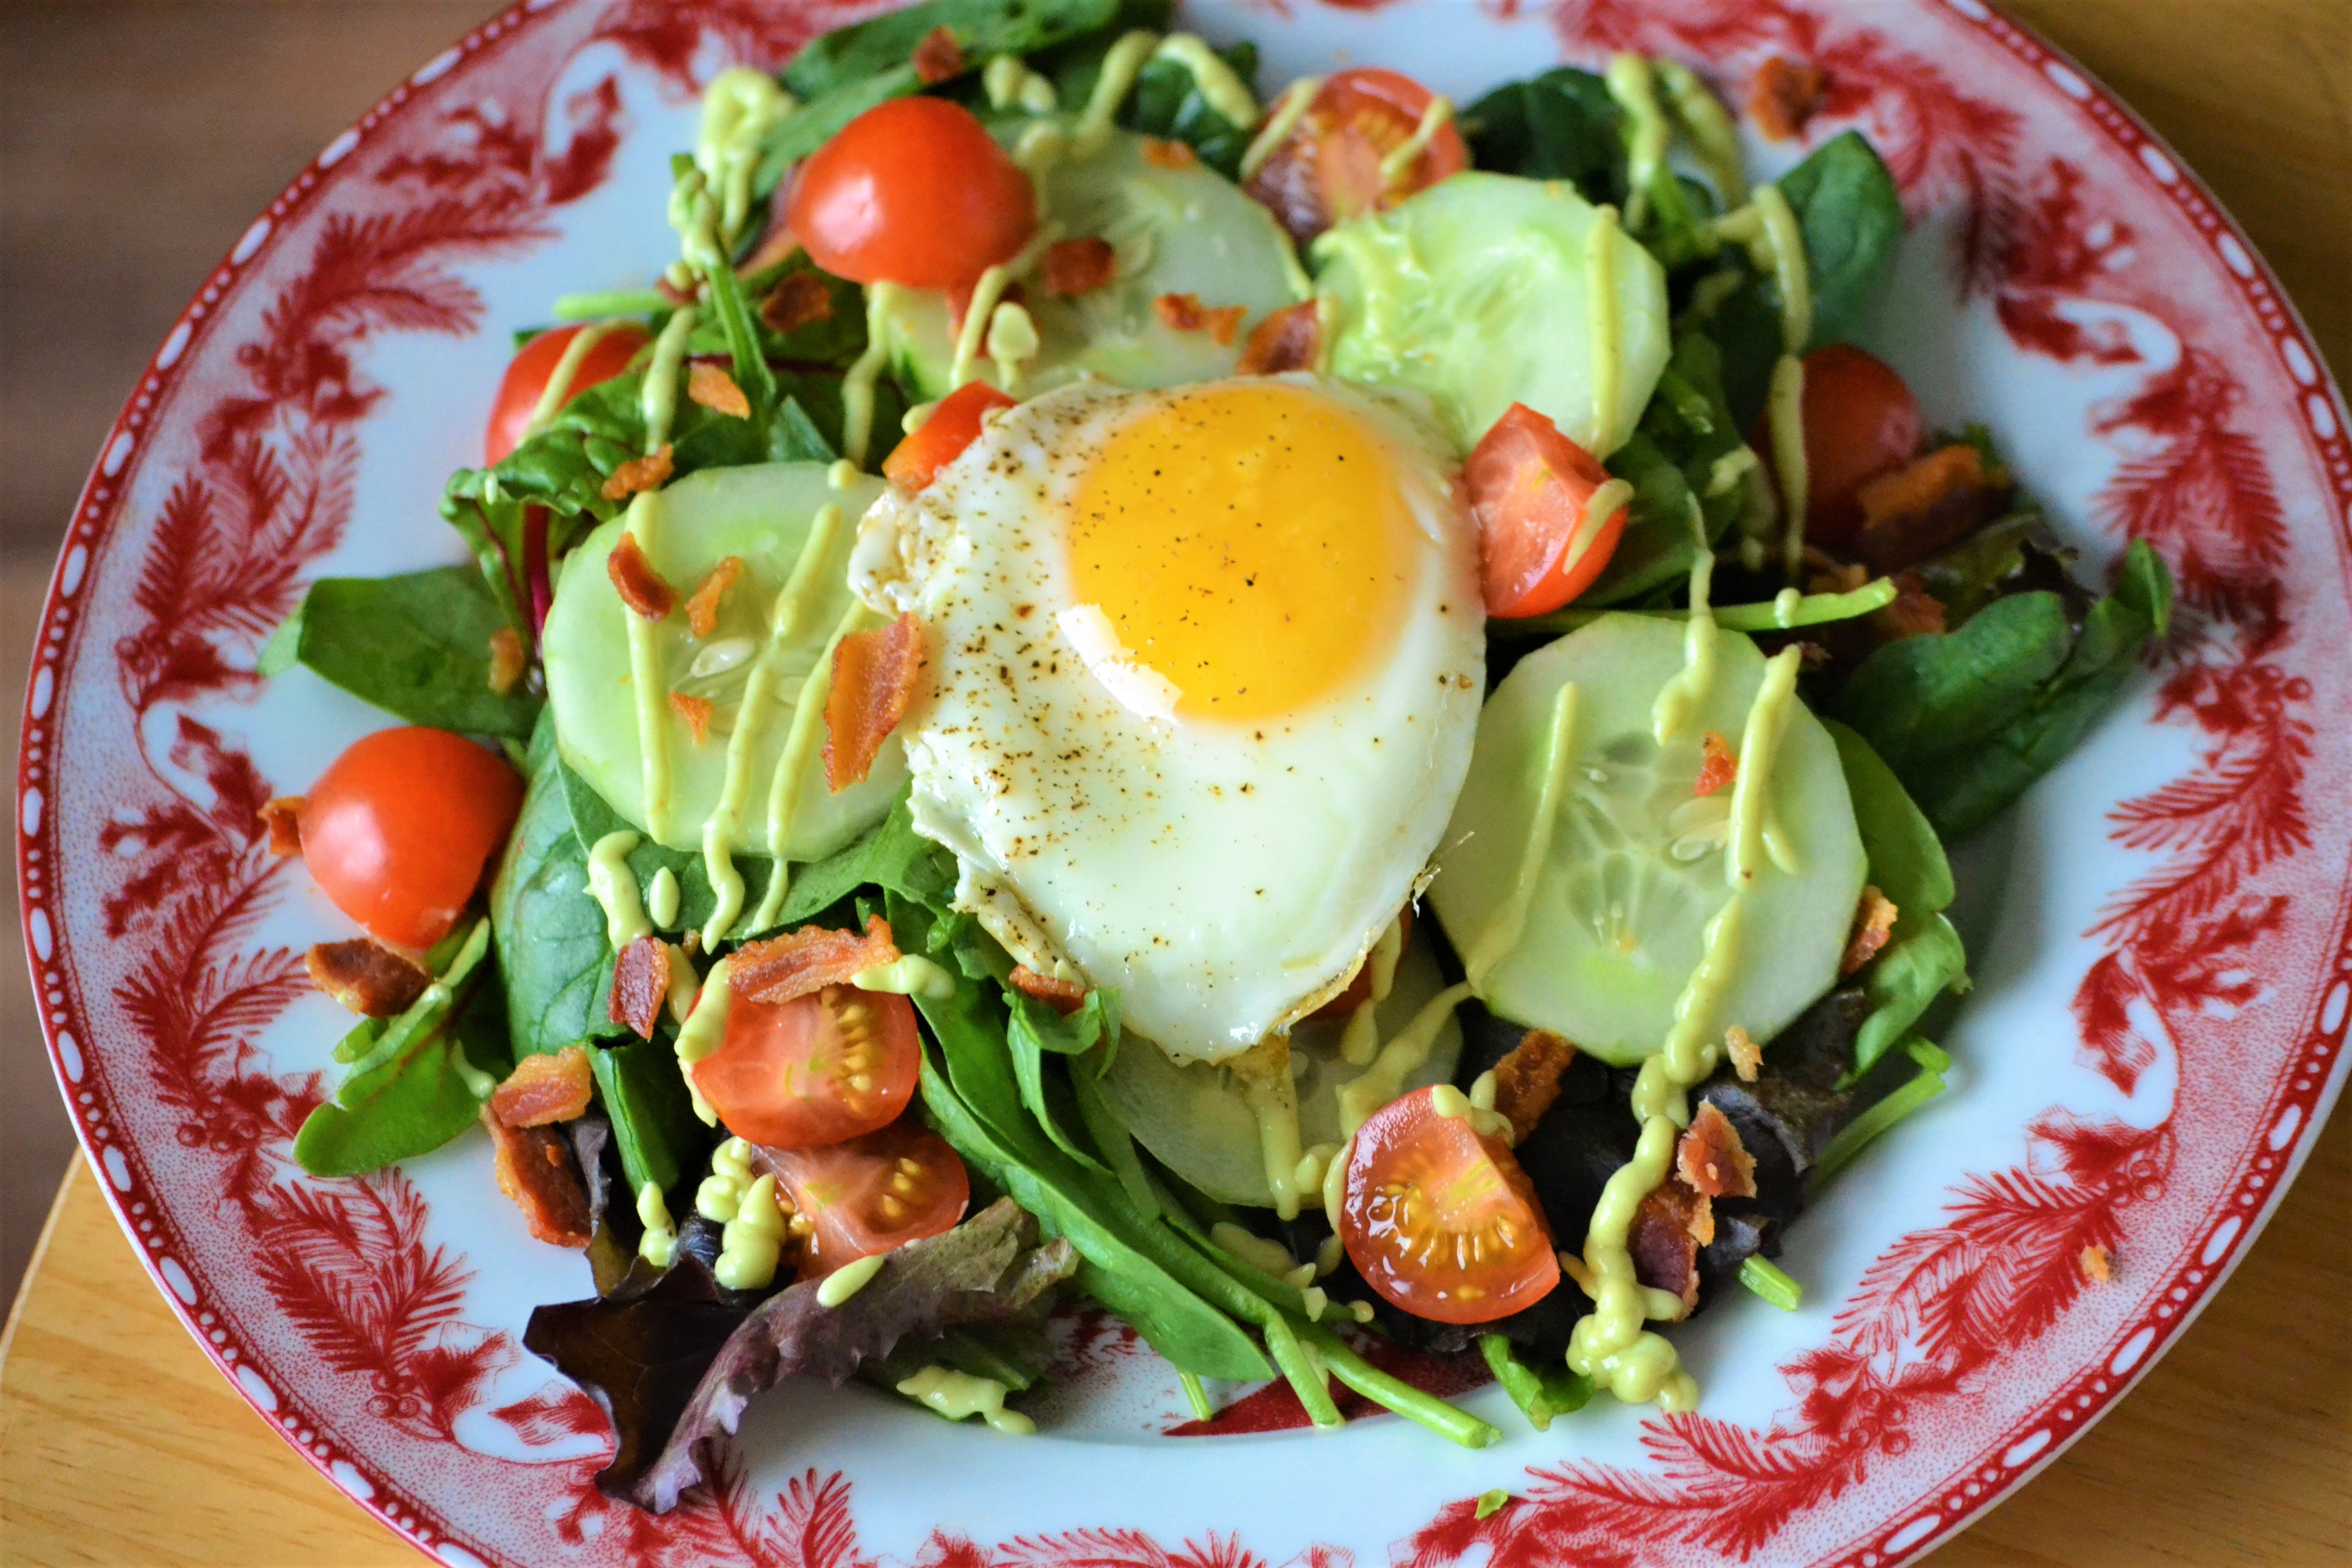 Bacon and Egg Breakfast Salad with Avocado Dressing